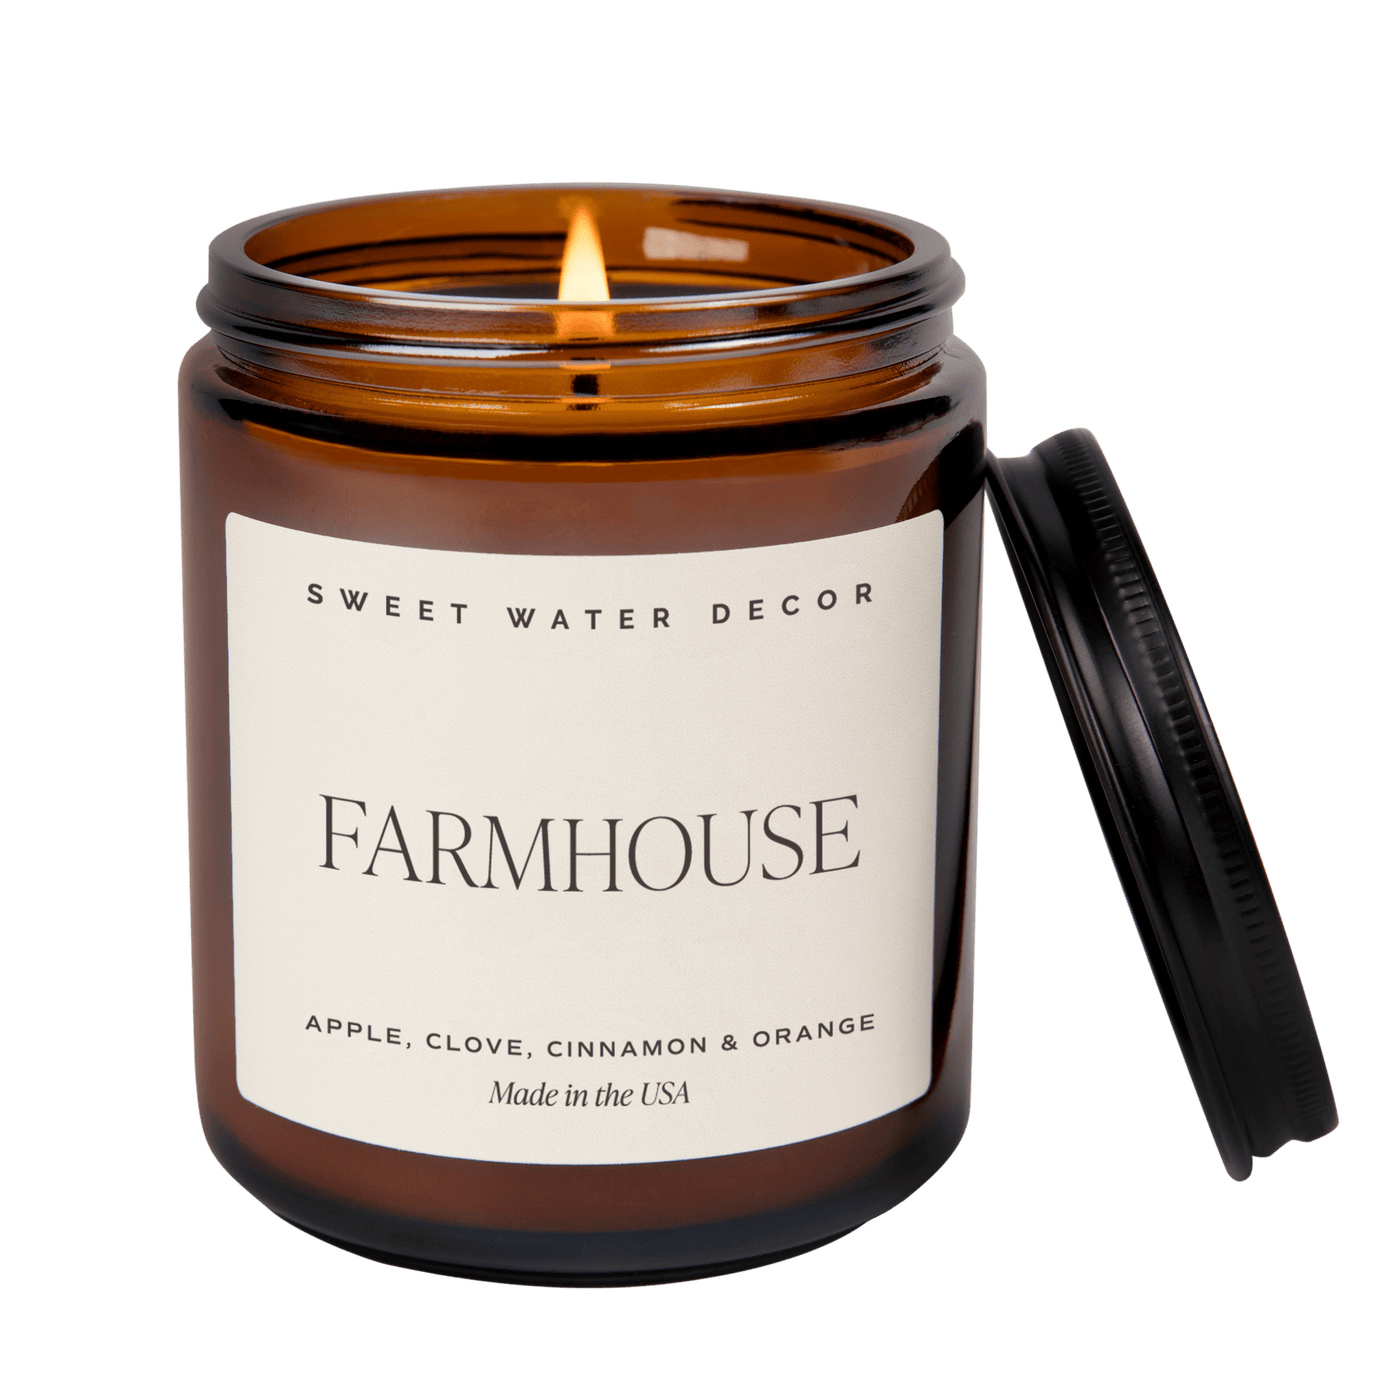 Farmhouse Soy Candle - Amber Jar - 9 oz - Sweet Water Decor - Candles